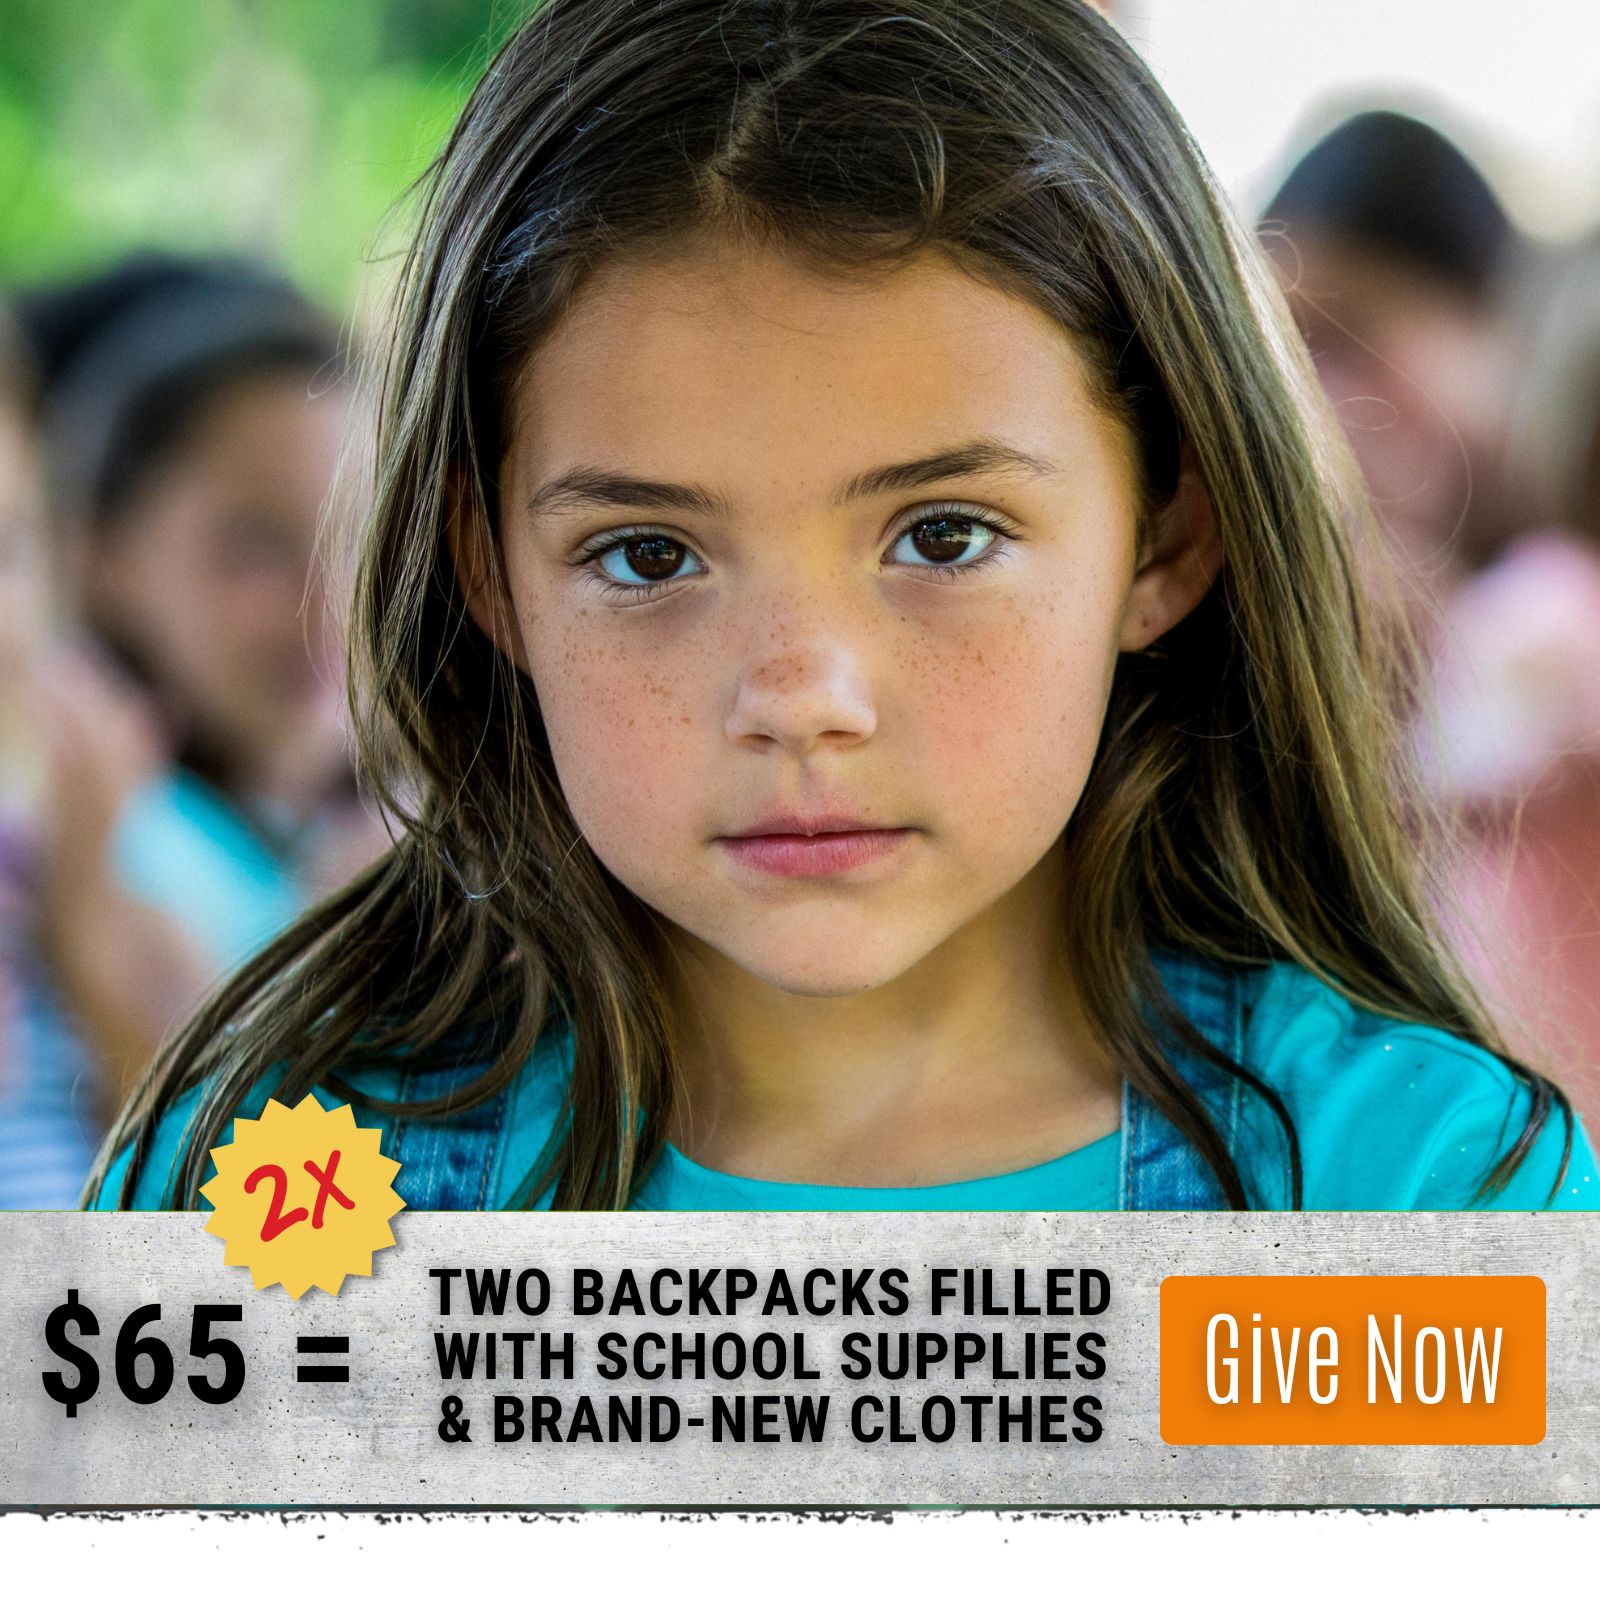 Young girl in classroom. Click to donate and provide backpacks filled with school supplies and brand new clothes. 